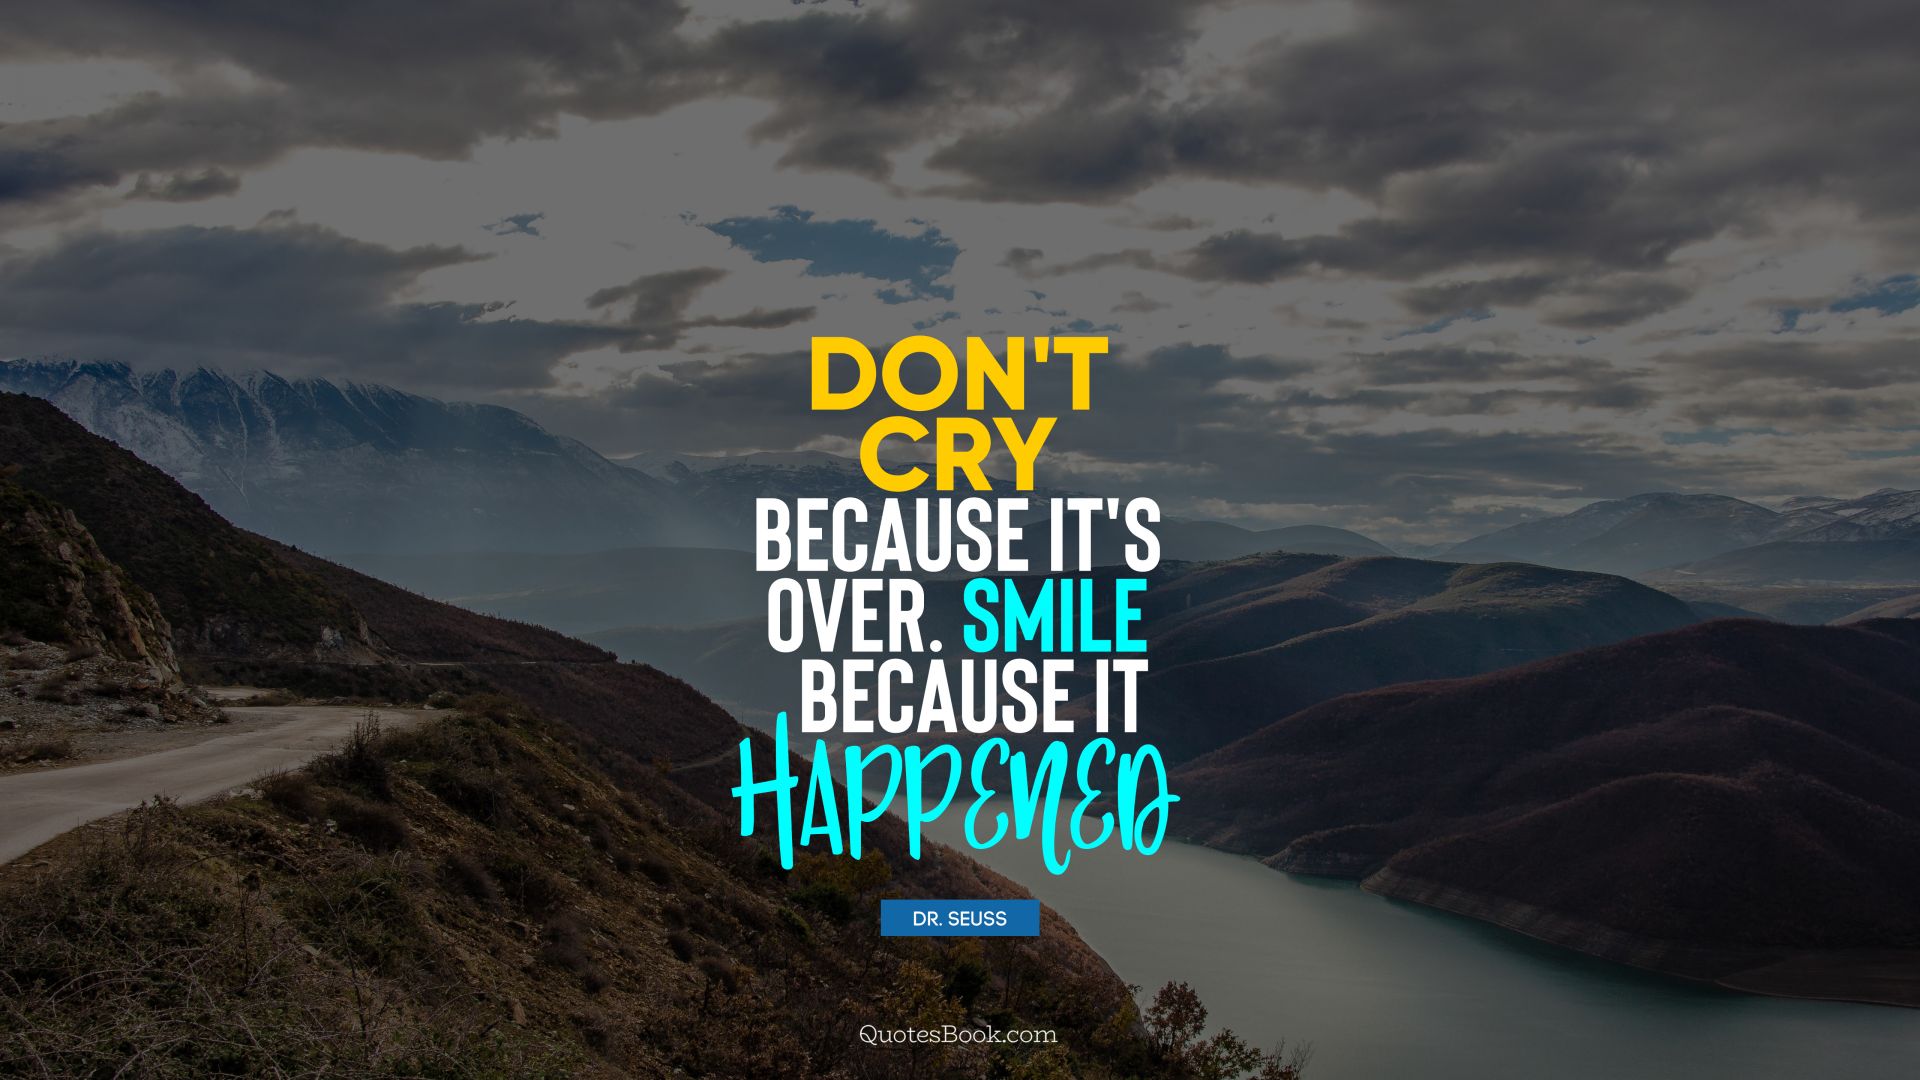 Don't cry because it's over. Smile because it happened. - Quote by Dr. Seuss - QuotesBook